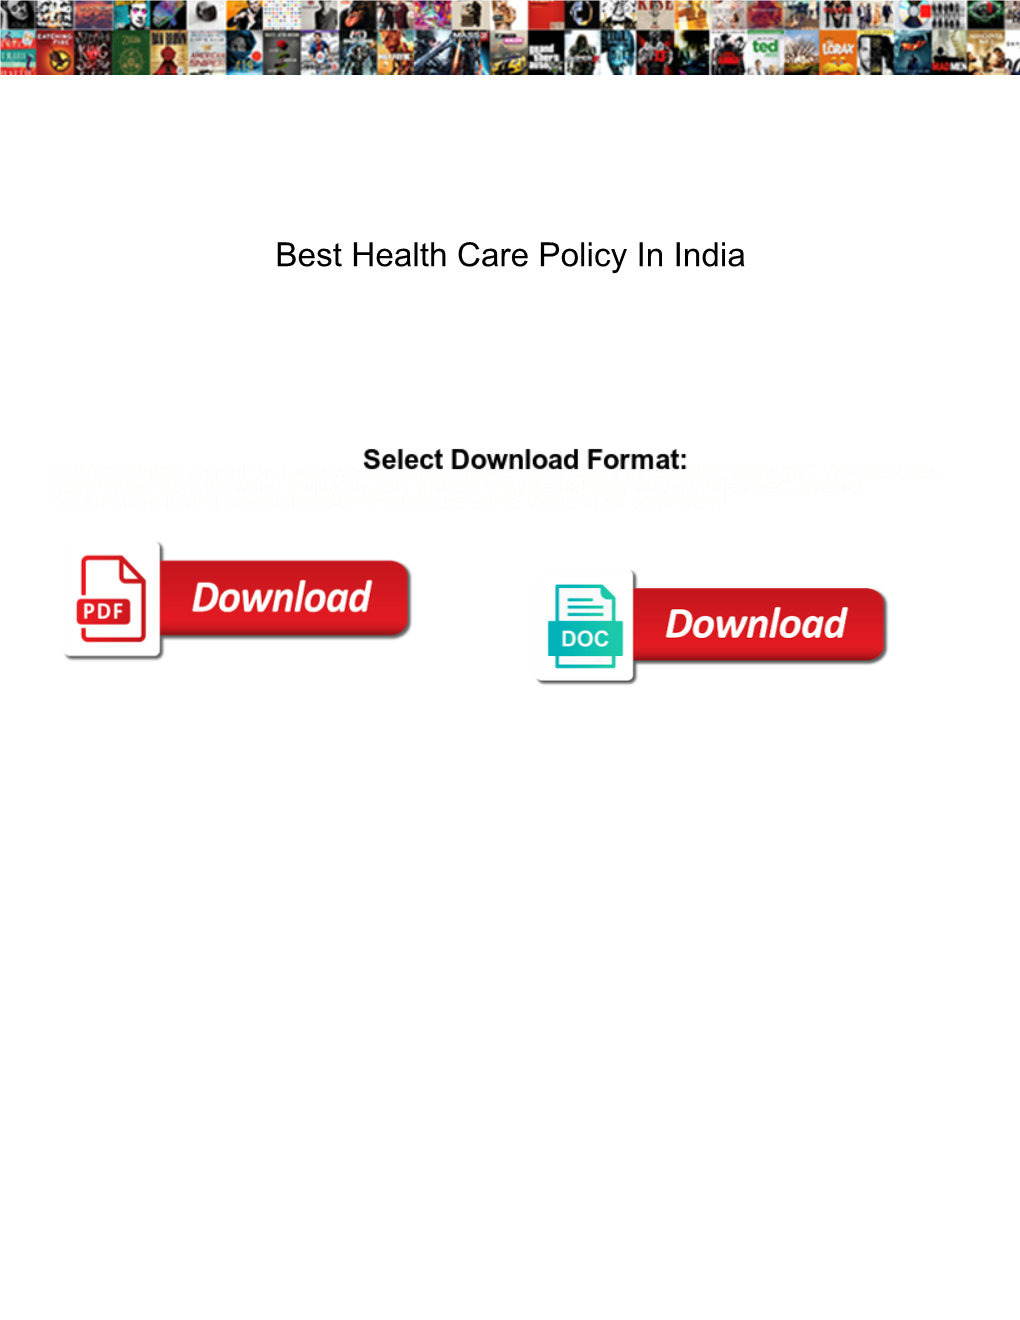 Best Health Care Policy in India